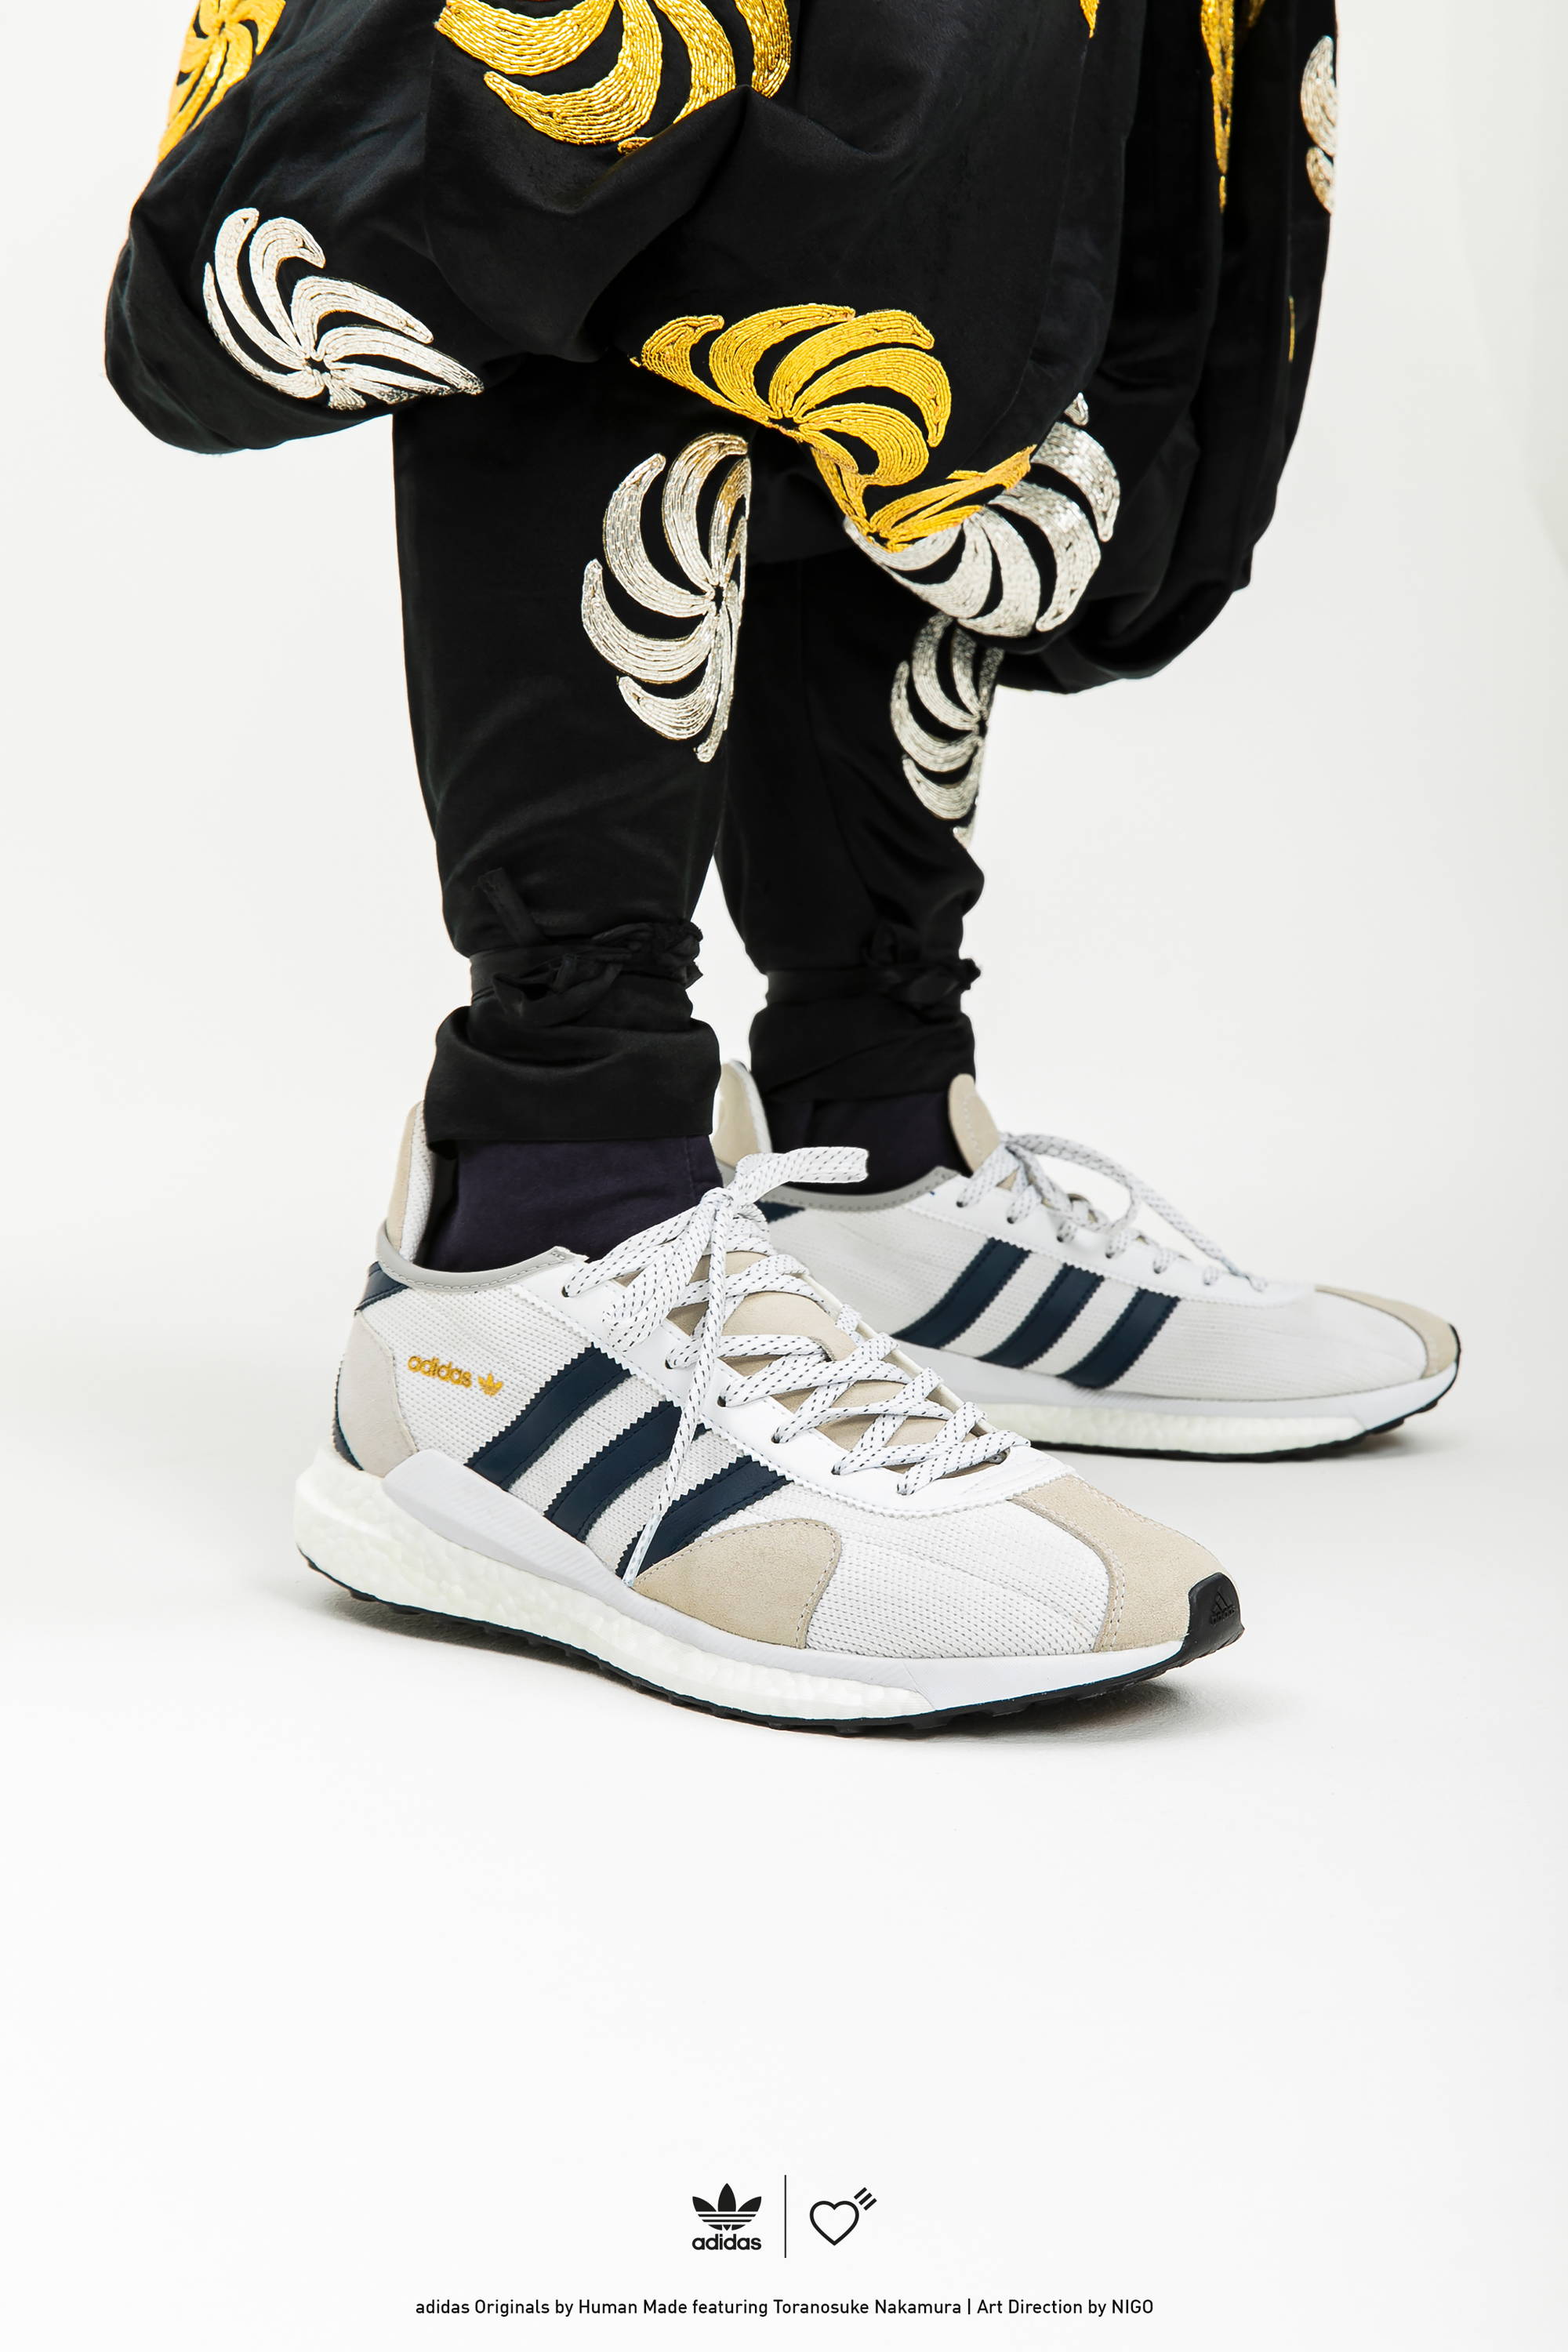 adidas x Human Made - FW20 Drop 1 – SUEDE Store